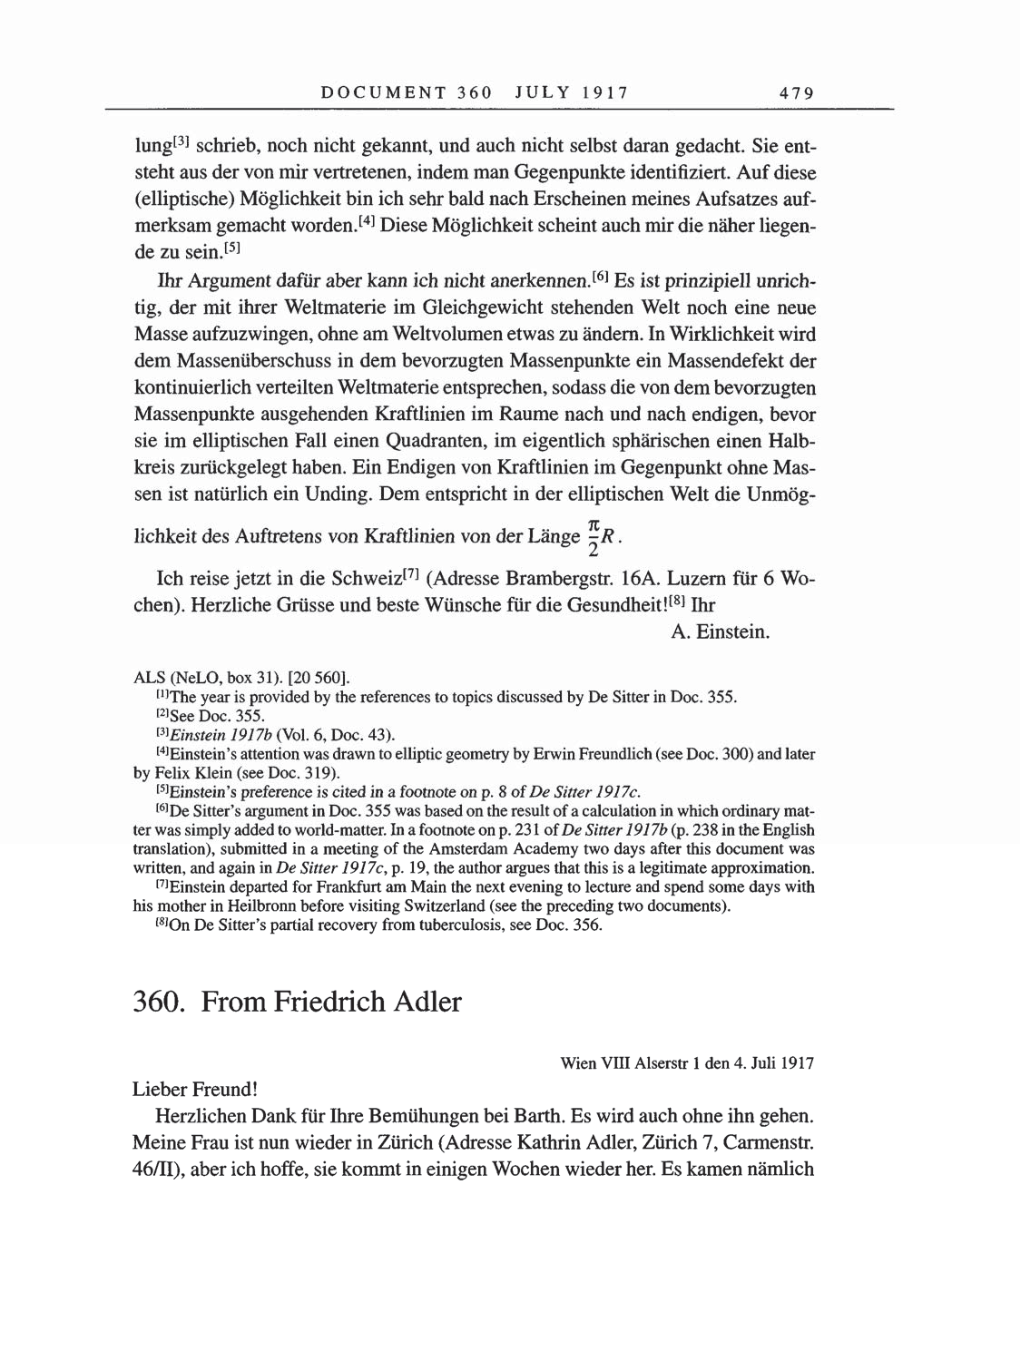 Volume 8, Part A: The Berlin Years: Correspondence 1914-1917 page 479